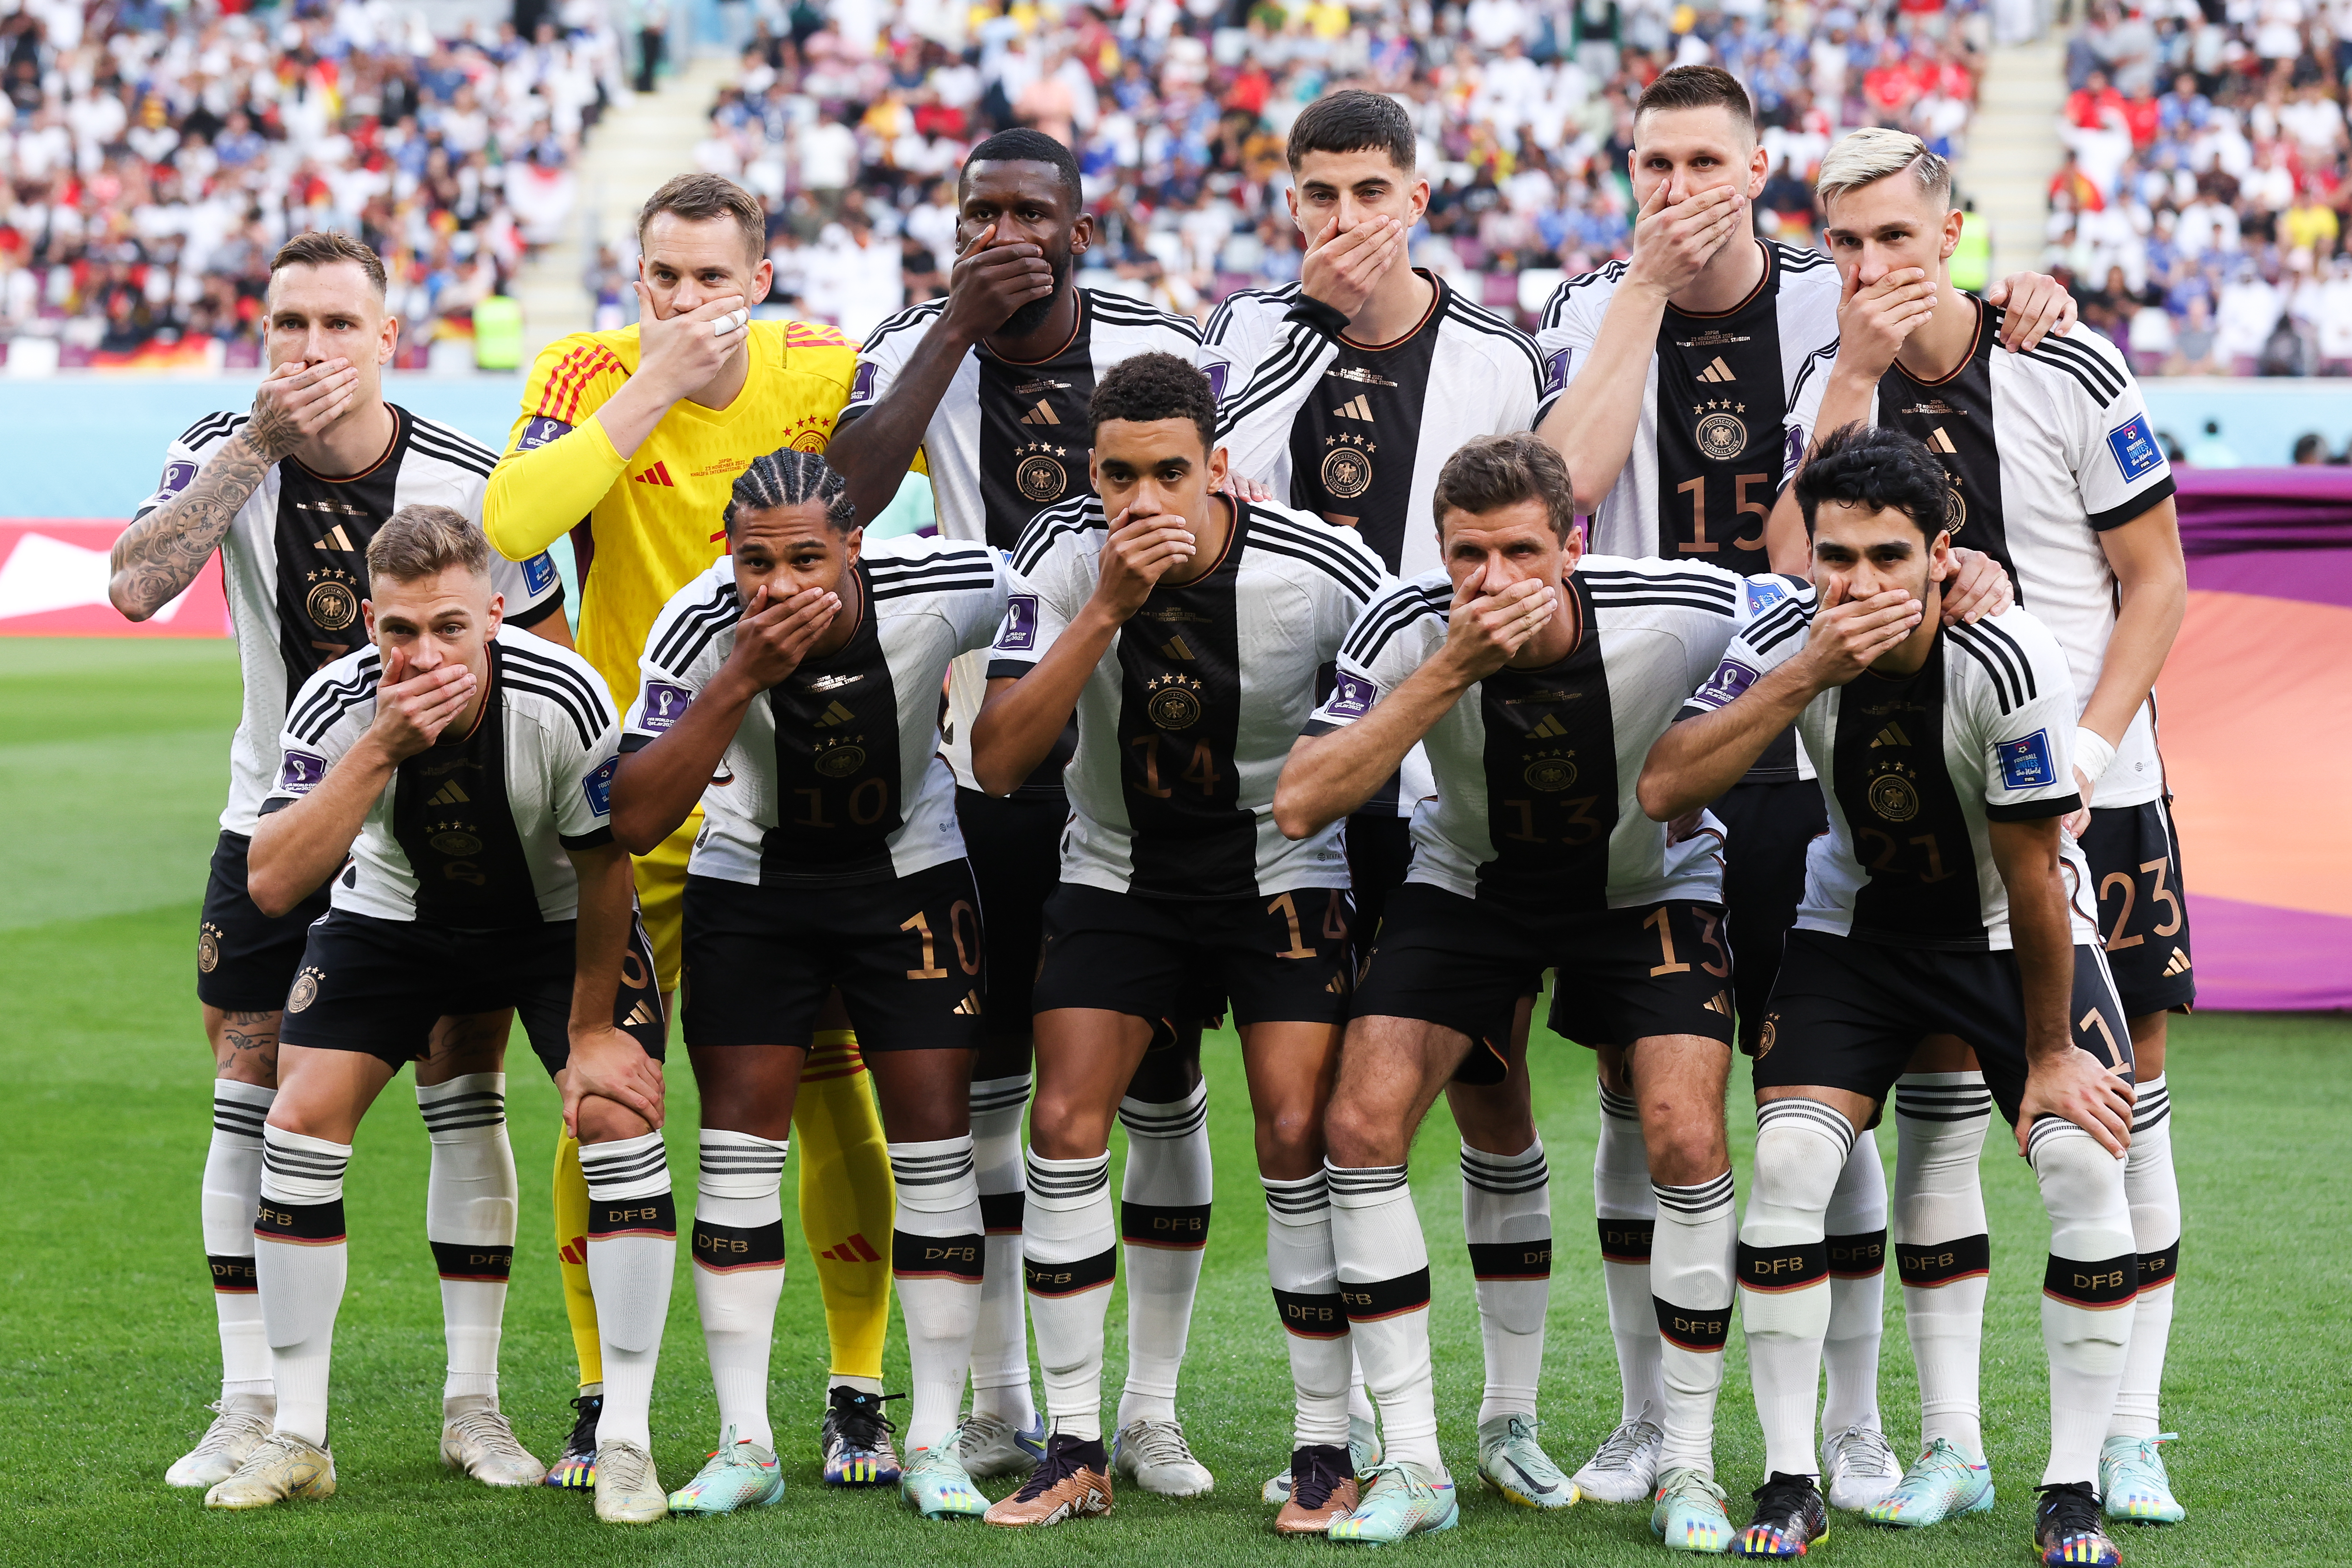 German soccer players cover their mouths during a photo op for the 2022 FIFA World Cup in Qatar.